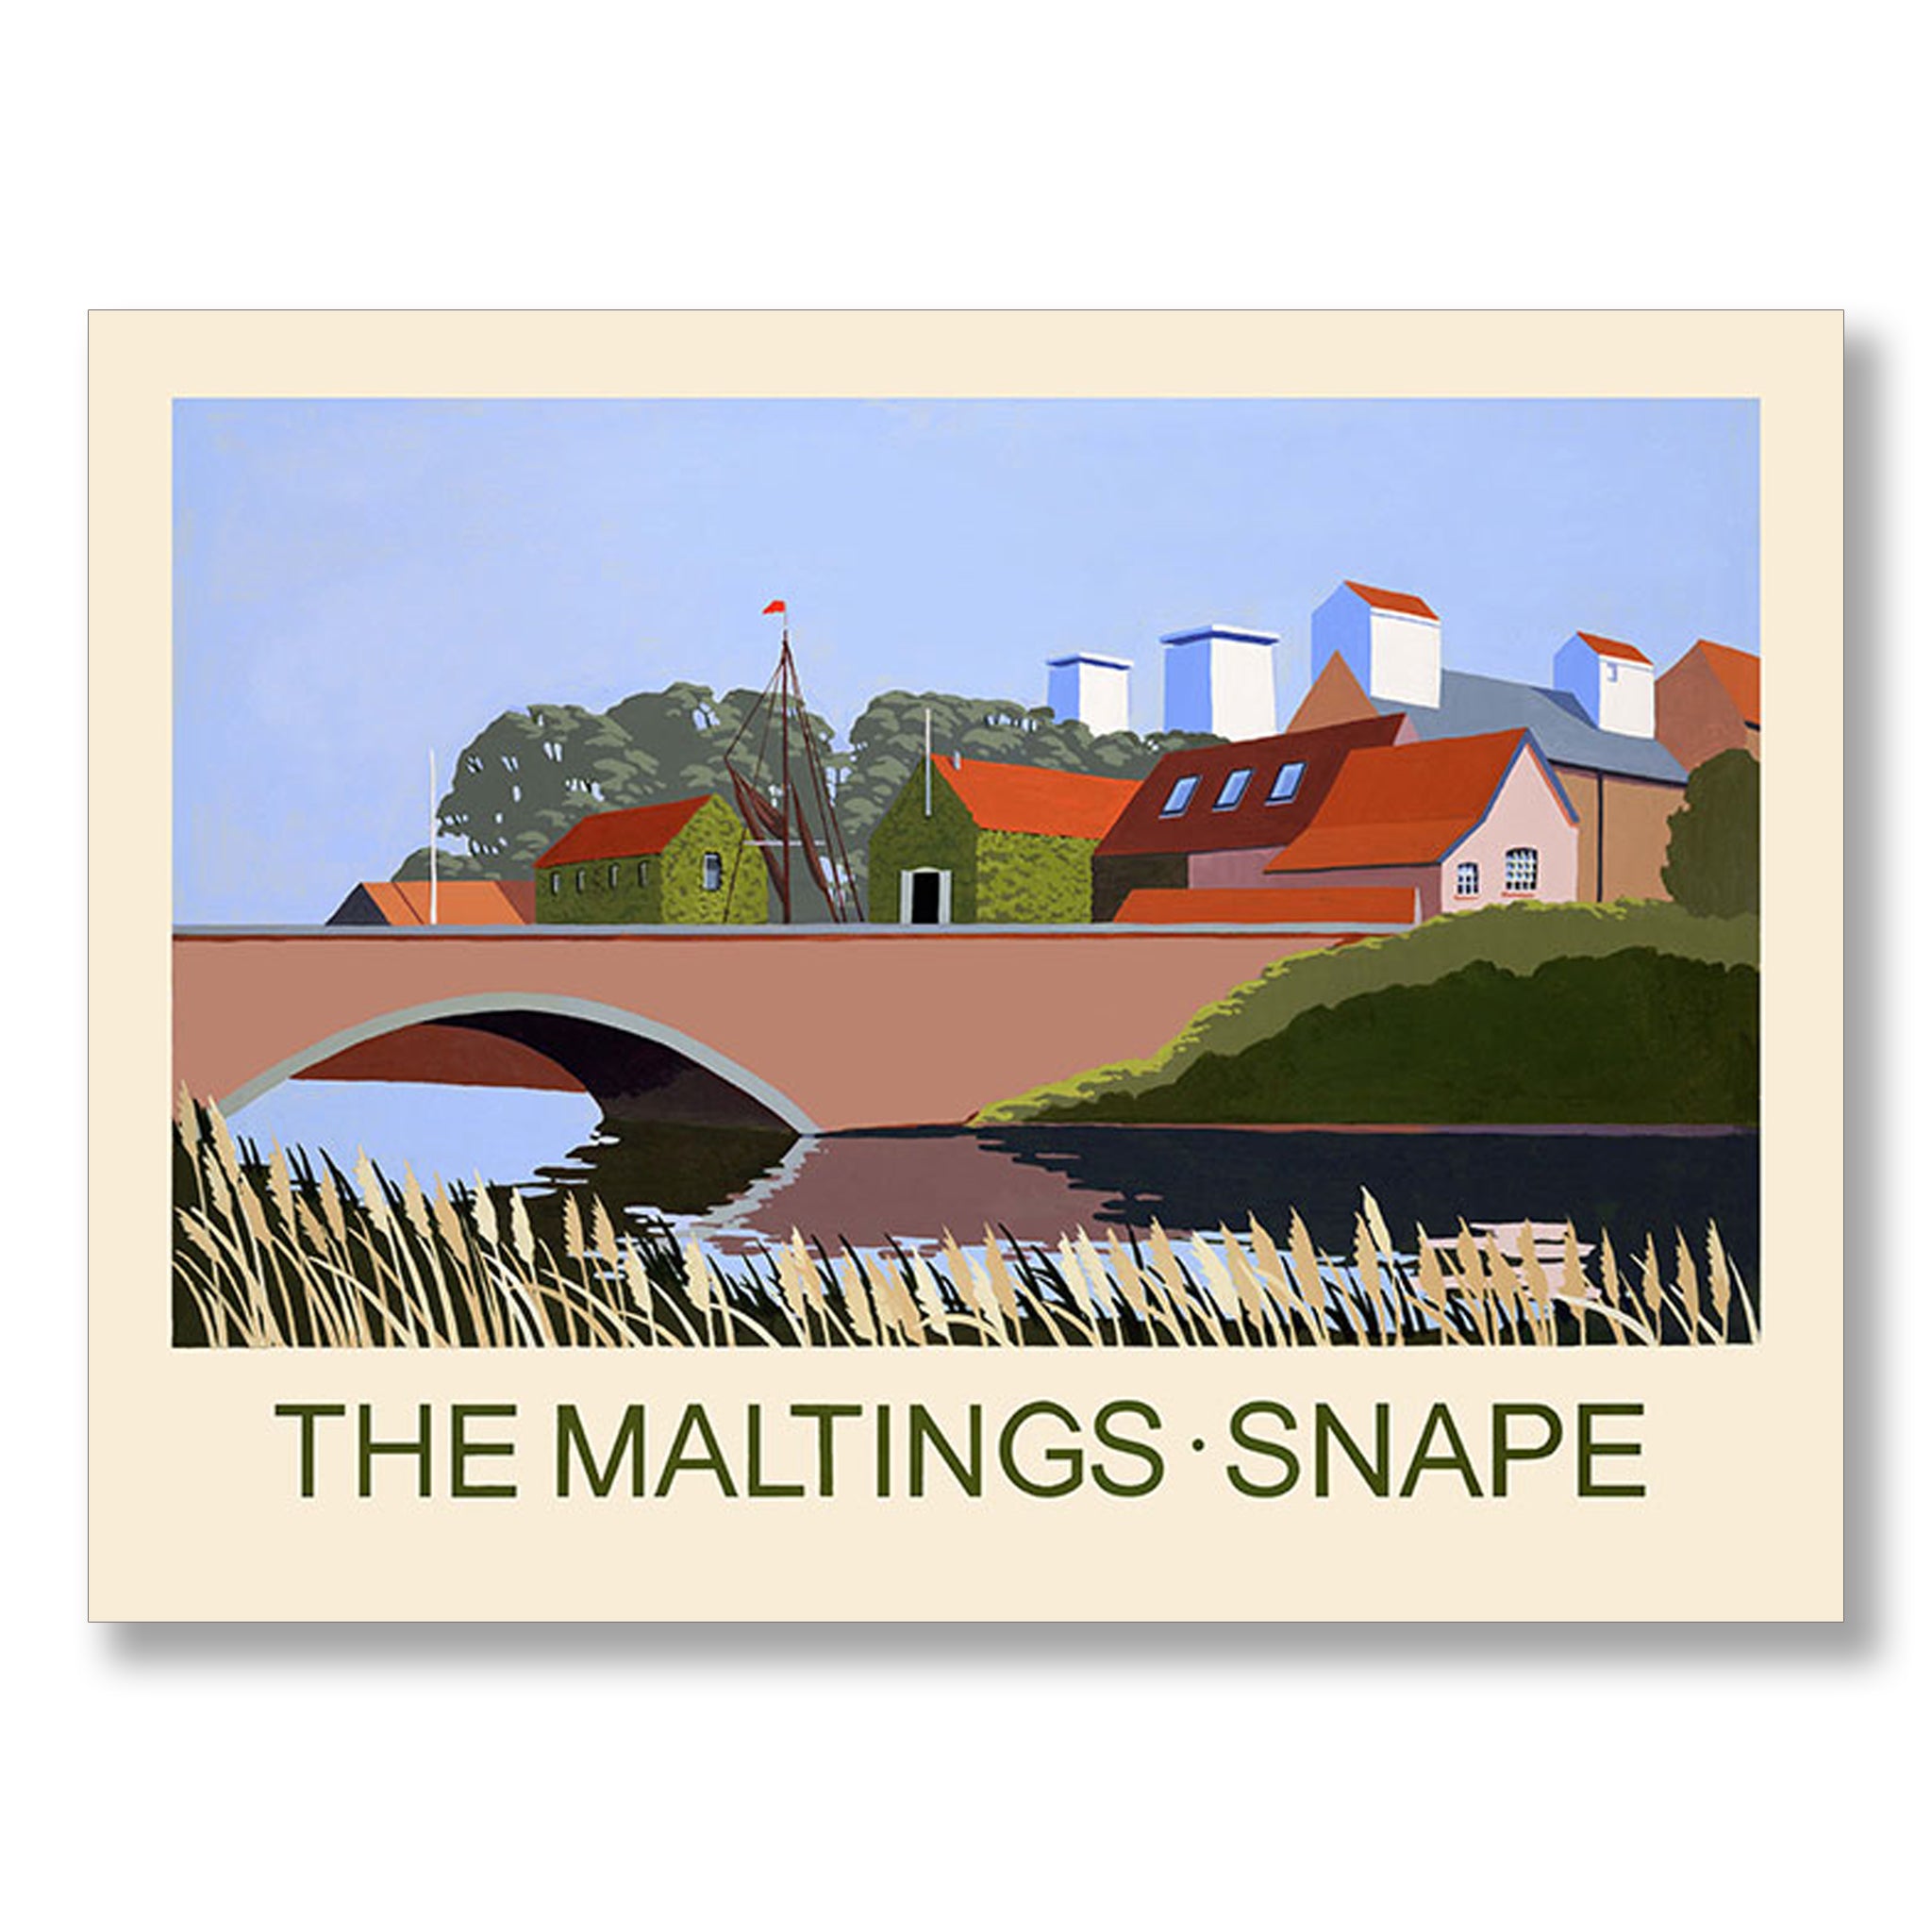 The Maltings, Snape by David Kirk